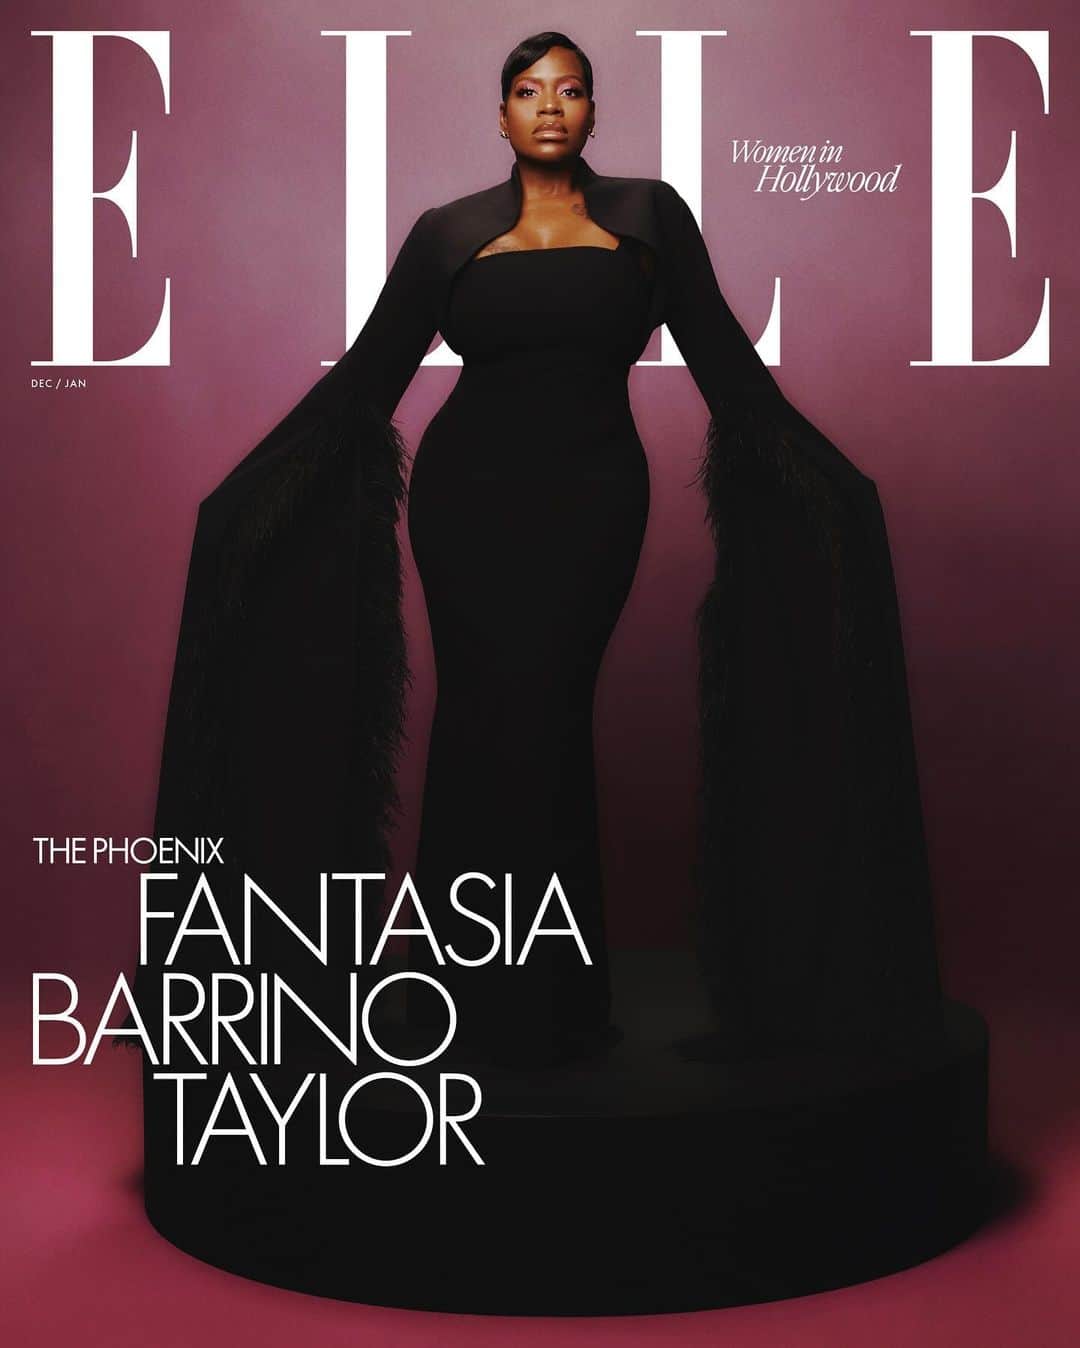 ニーナ・ガルシアのインスタグラム：「Our next three #ELLEWIH honorees are making big moves with their careers, breaking boundaries and embracing change. #TheColorPurple’s @tasiasword says “This Tasia is different,” to @elleusa. ”I was not ready for Hollywood when I was 19.” @evalongoria, director of #FlaminHot, says that to get where she is today, “You have to work harder; you have to work smarter. I don’t mind doing that until we have equality. I’m going to keep pushing the line and doing all I can to pave the road.” @tarajiphenson, who is making her Broadway debut as a producer of #JajasAfricanHairBraiding, says, “I thought it was going to be acting that brought me to Broadway, but look at life. I was thinking too small, I guess.” Read more from our #ELLEWIH honorees at the link in bio. — Our editors worked directly with the Screen Actors Guild during its recent strike to make sure we could honor women in Hollywood while still adhering to union guidelines. — Photographers: @adrienneraquel @zoeygrossman Stylists: @zerinaakers @waymanandmicah @alexwhiteedits Writers: @juliana_uki @theislandiva #AdrienneGaffney Hair: @tymwallacehair @mastermind_mgmt @teddycharles35 @nikkinelms @sheamoisture Makeup: @saishabeecham @artistmanagementmiami @patidubroff @forwardartists @rokaelbeauty Manicure: @aframe_agency @ashlie_johnson @thewallgroup Production: @thesaintsalome @petty_cash_production @lolaproduction Set design: #BryanPorter at #OwlandtheElephant」